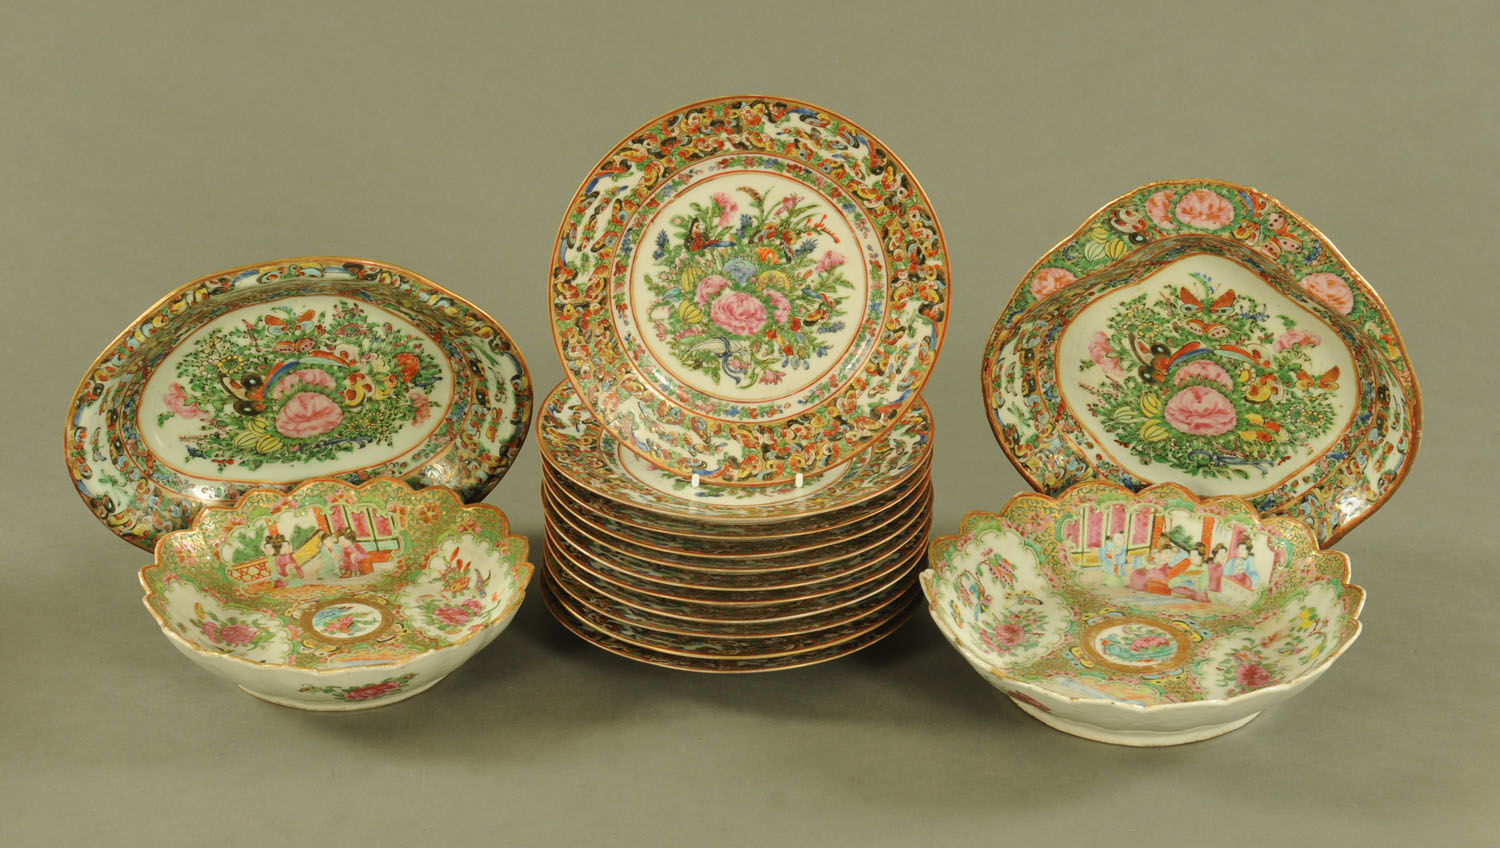 A collection of Cantonese plates and dishes. Ten 21 cm plates and 4 dishes (various).